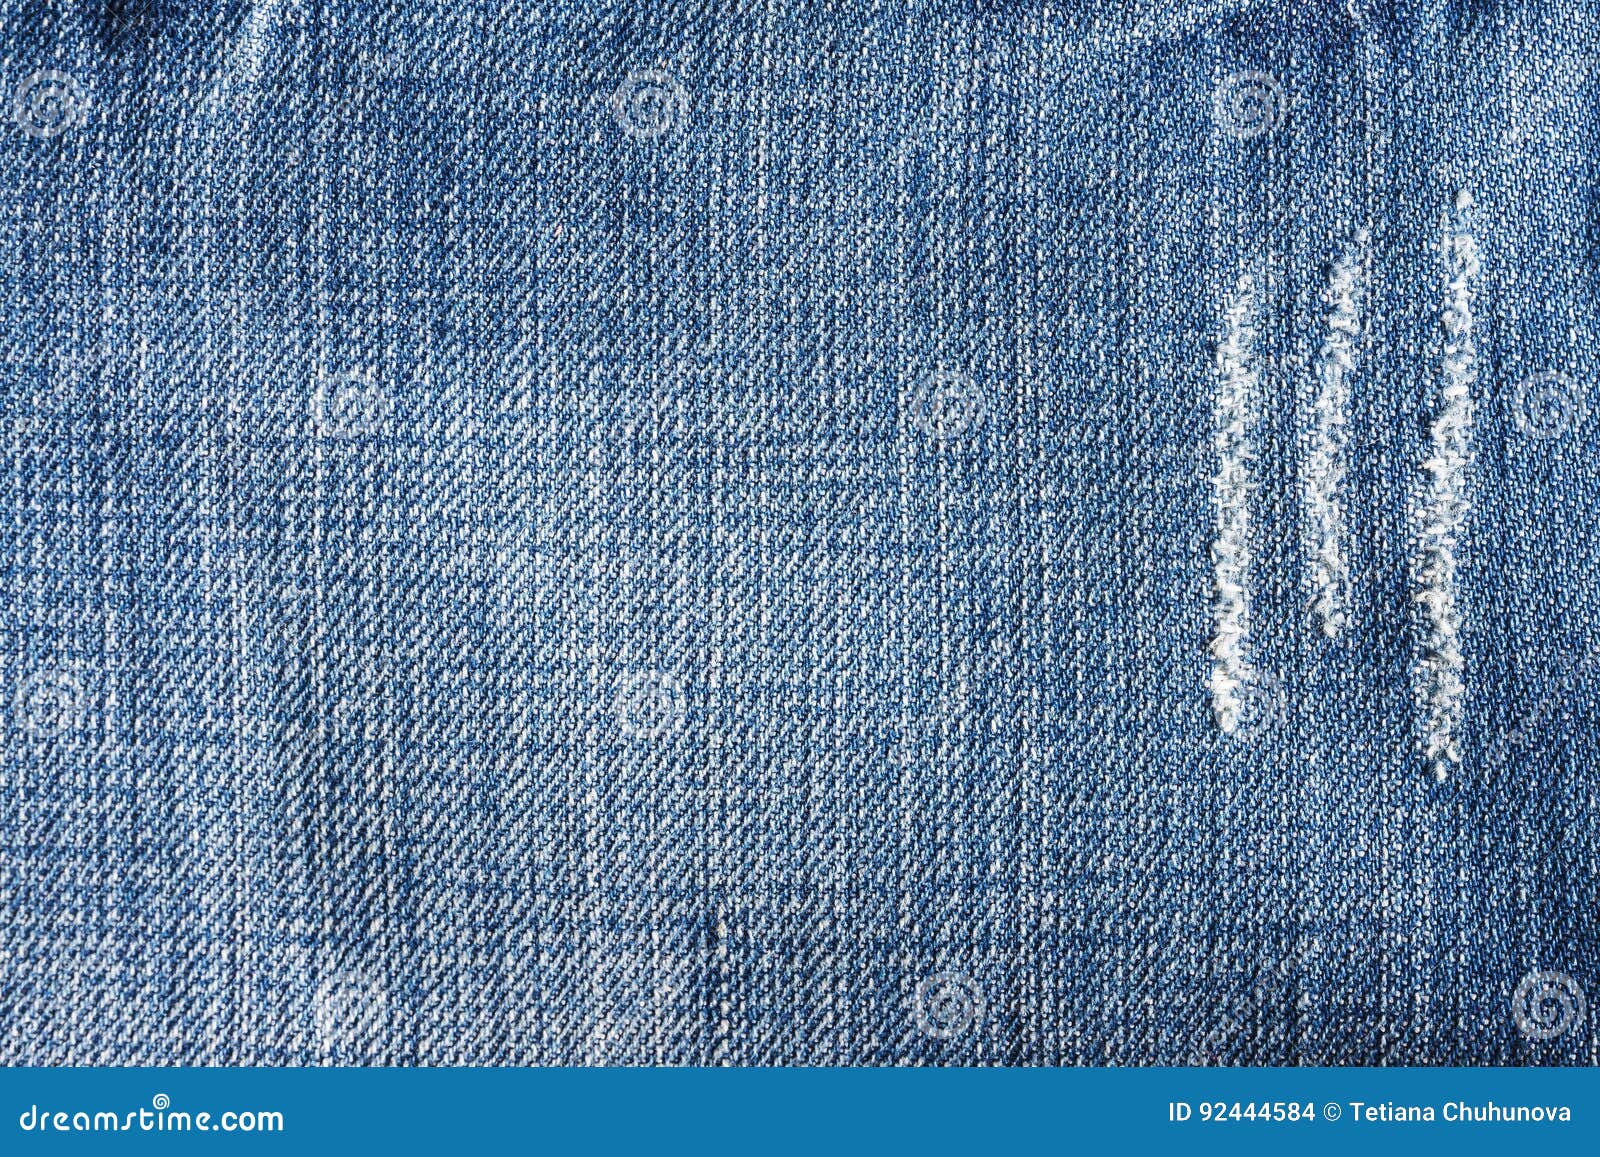 jeans close-up, texture, torn, mopped pieces.